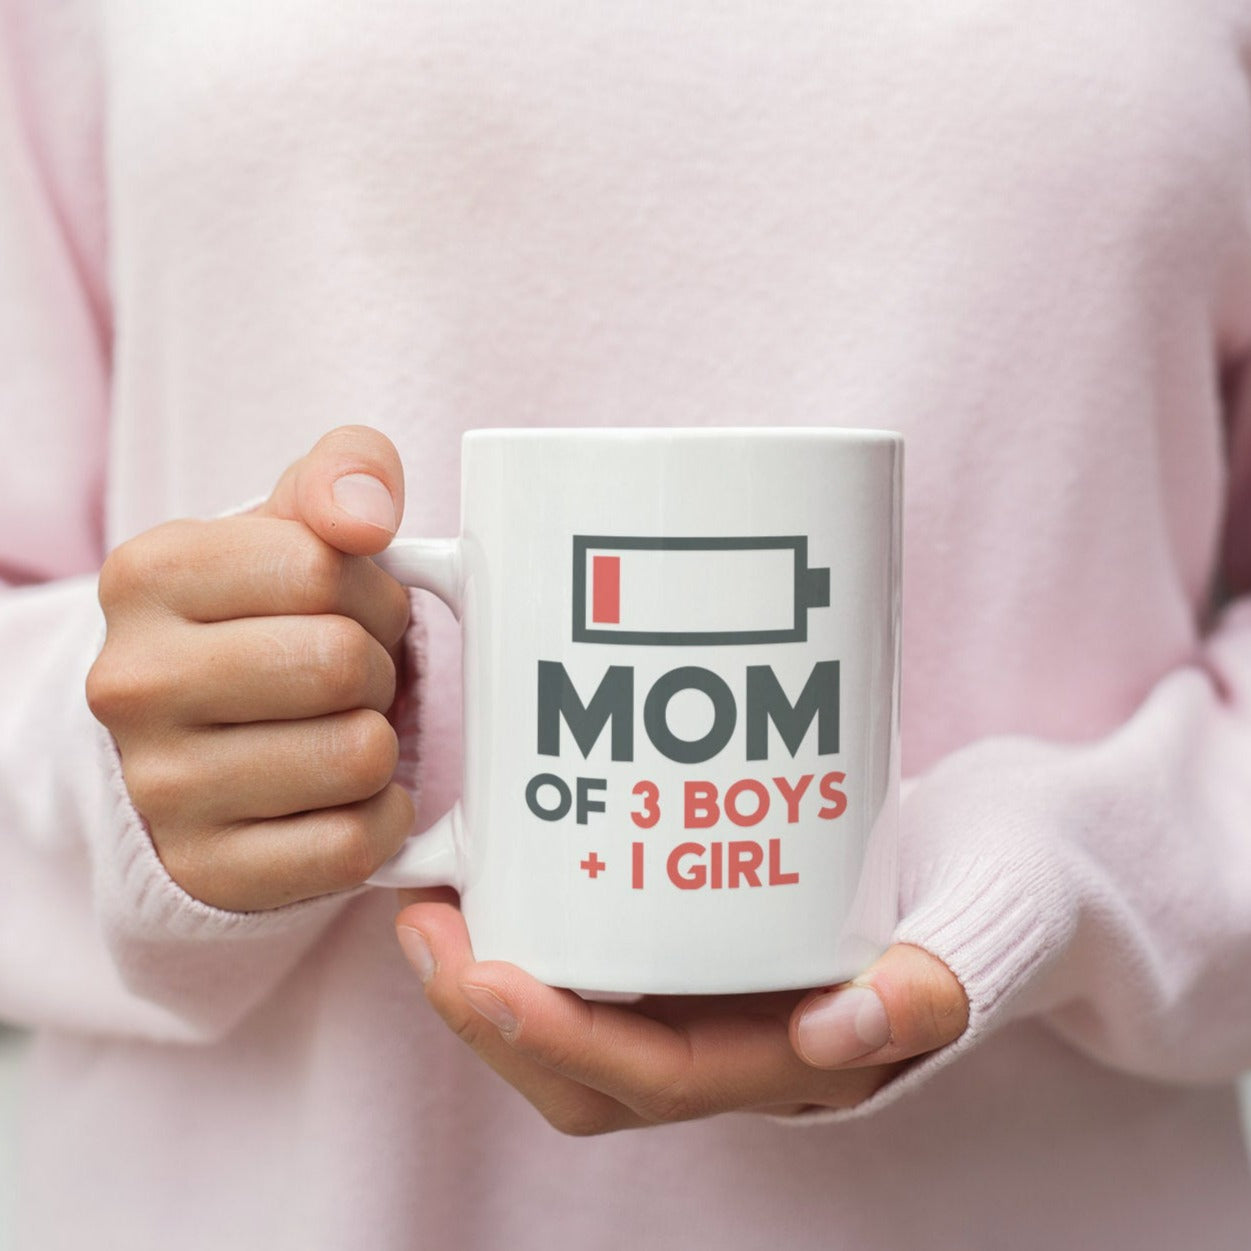 Mom of Kids Funny Mothers Day Shirt